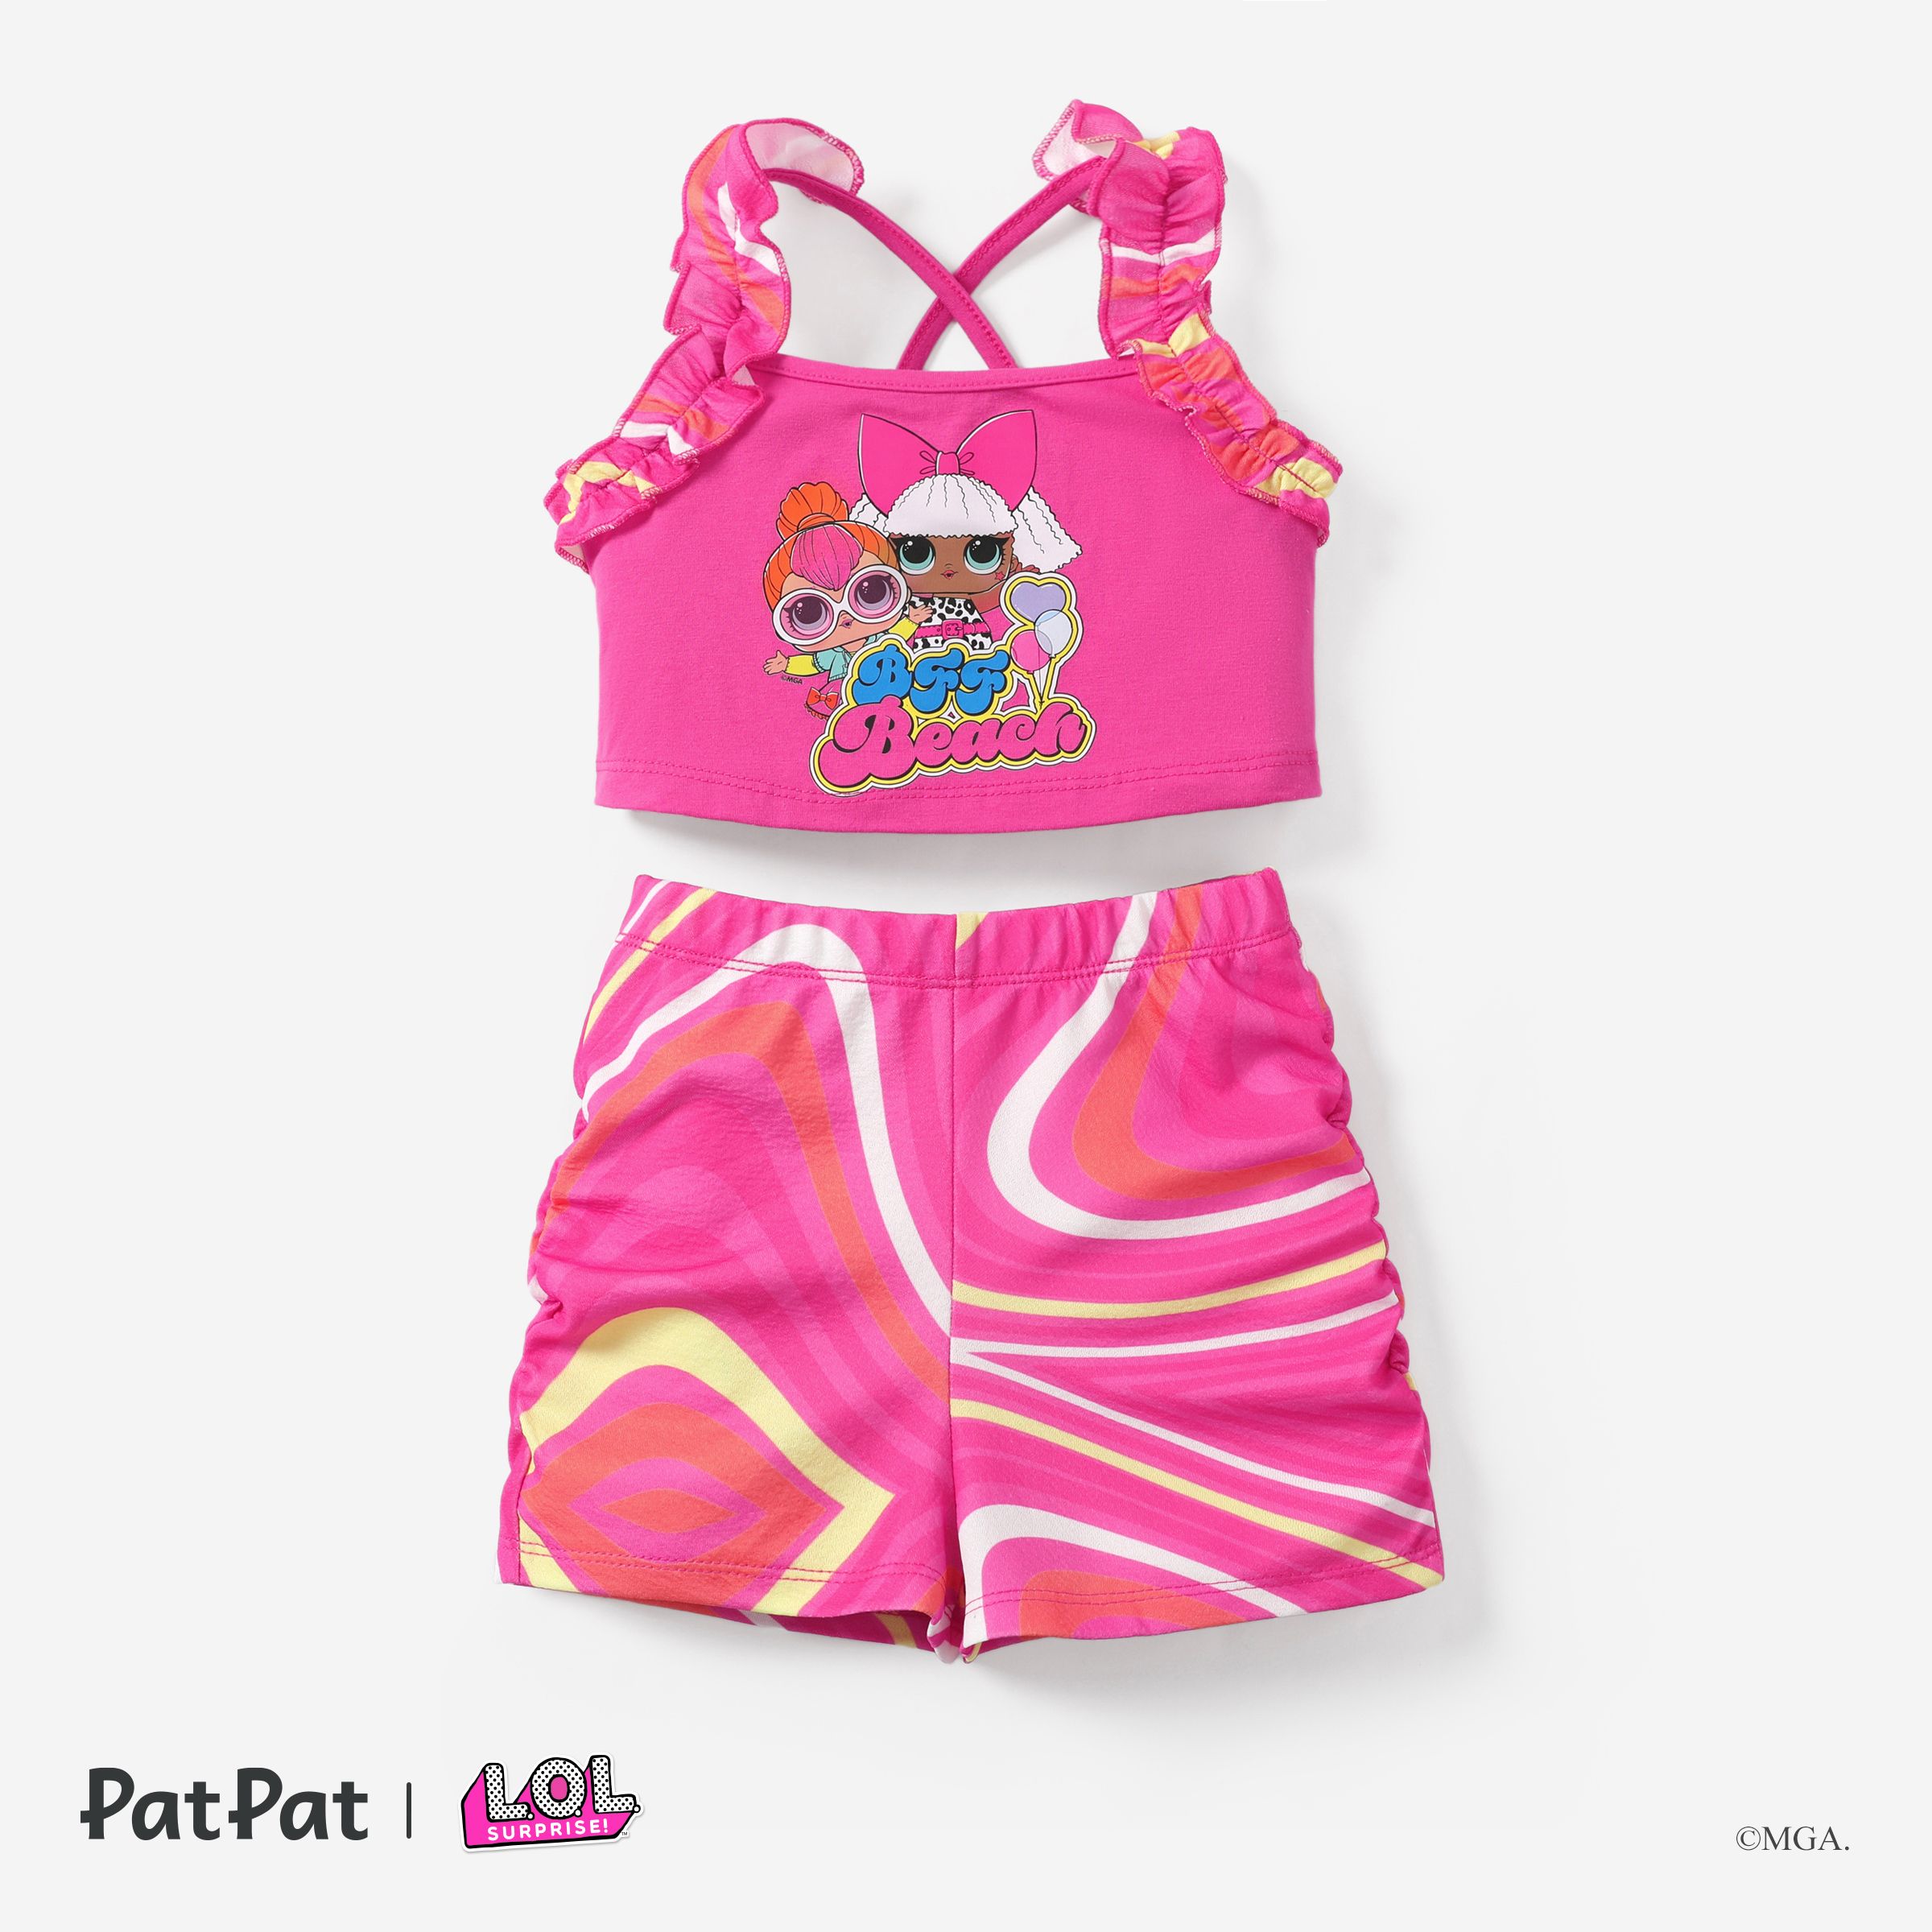 L.O.L. SURPRISE! 2pcs Toddler/Kids Girls Character Print Ruffle Halter Cropped Top with Shorts Set